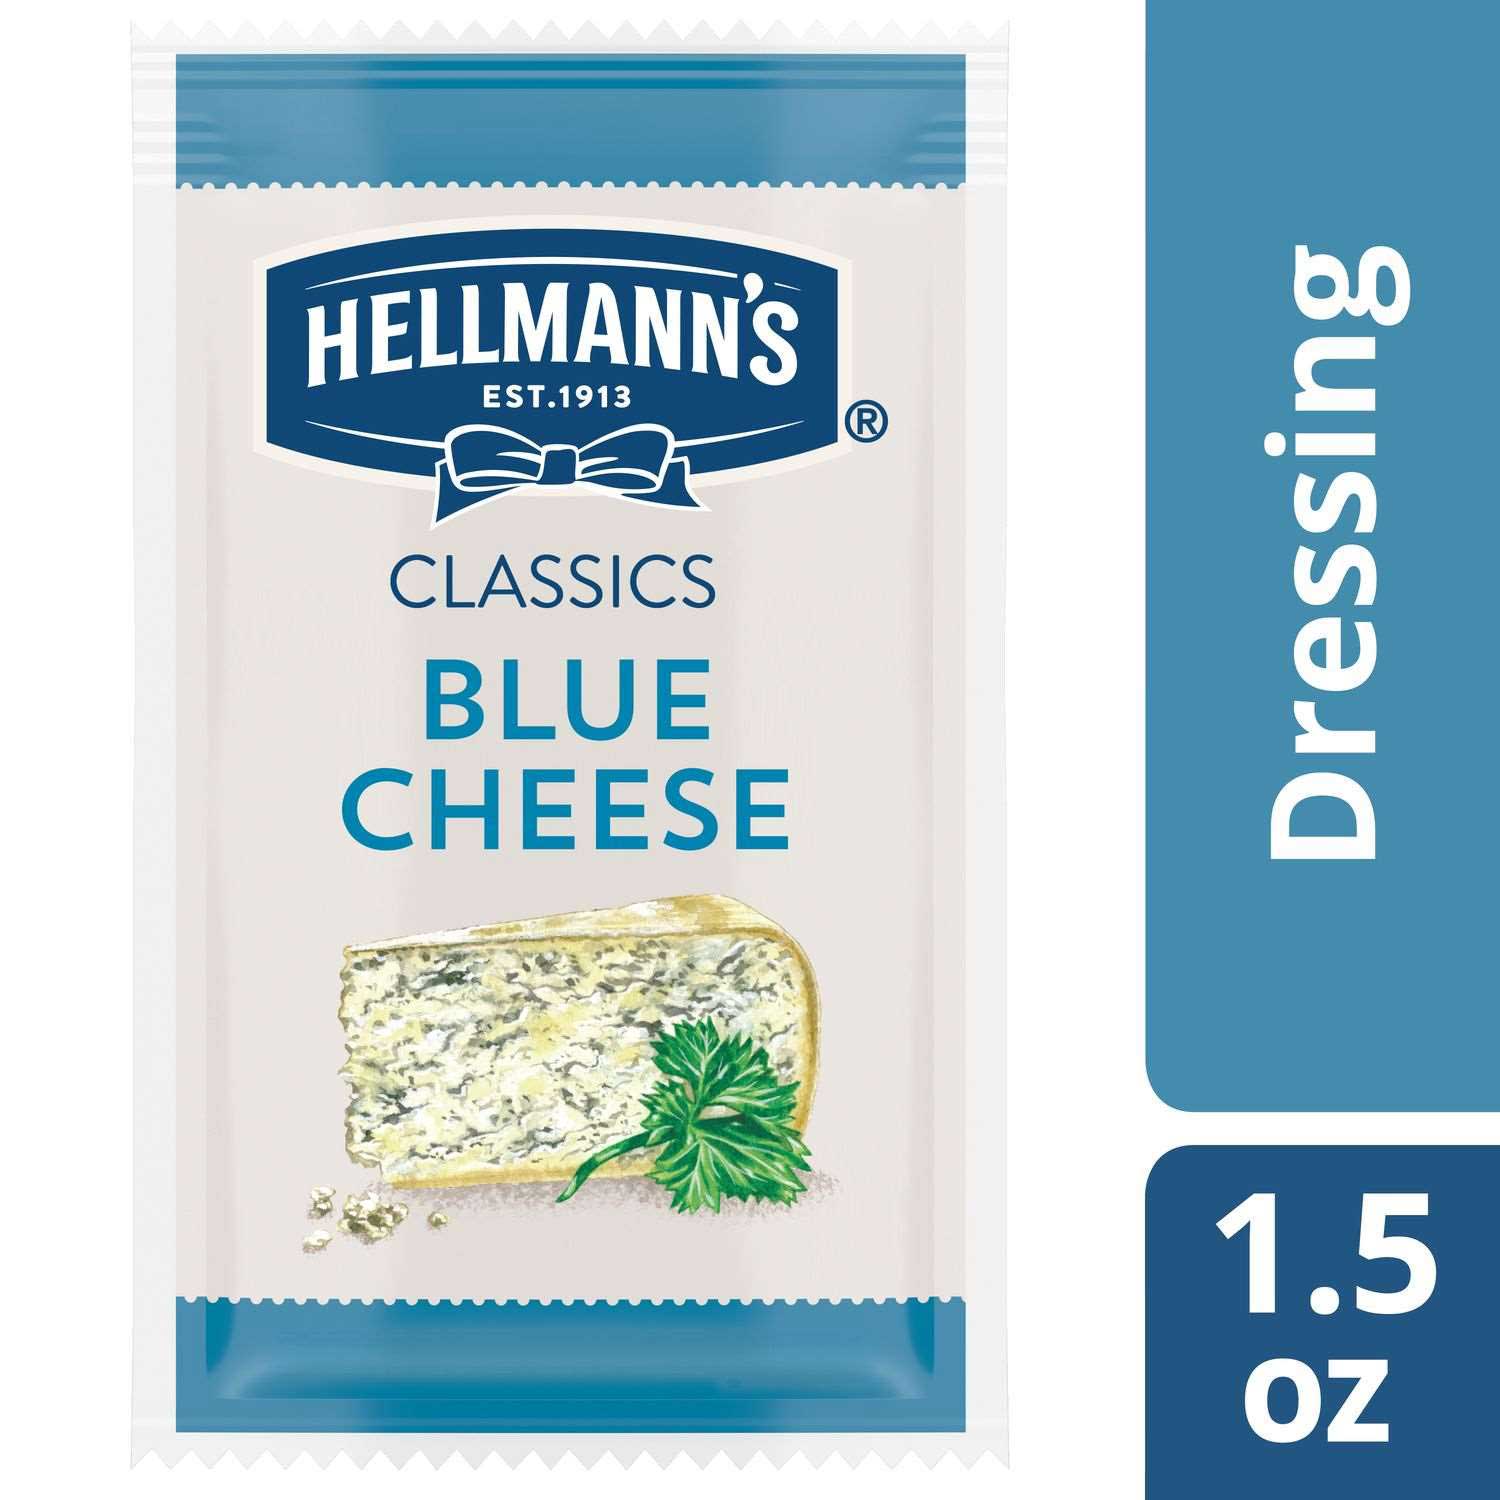 Hellmann's Classics Salad Dressing Portion Control Sachets Blue Cheese 1.5 oz, Pack of 102